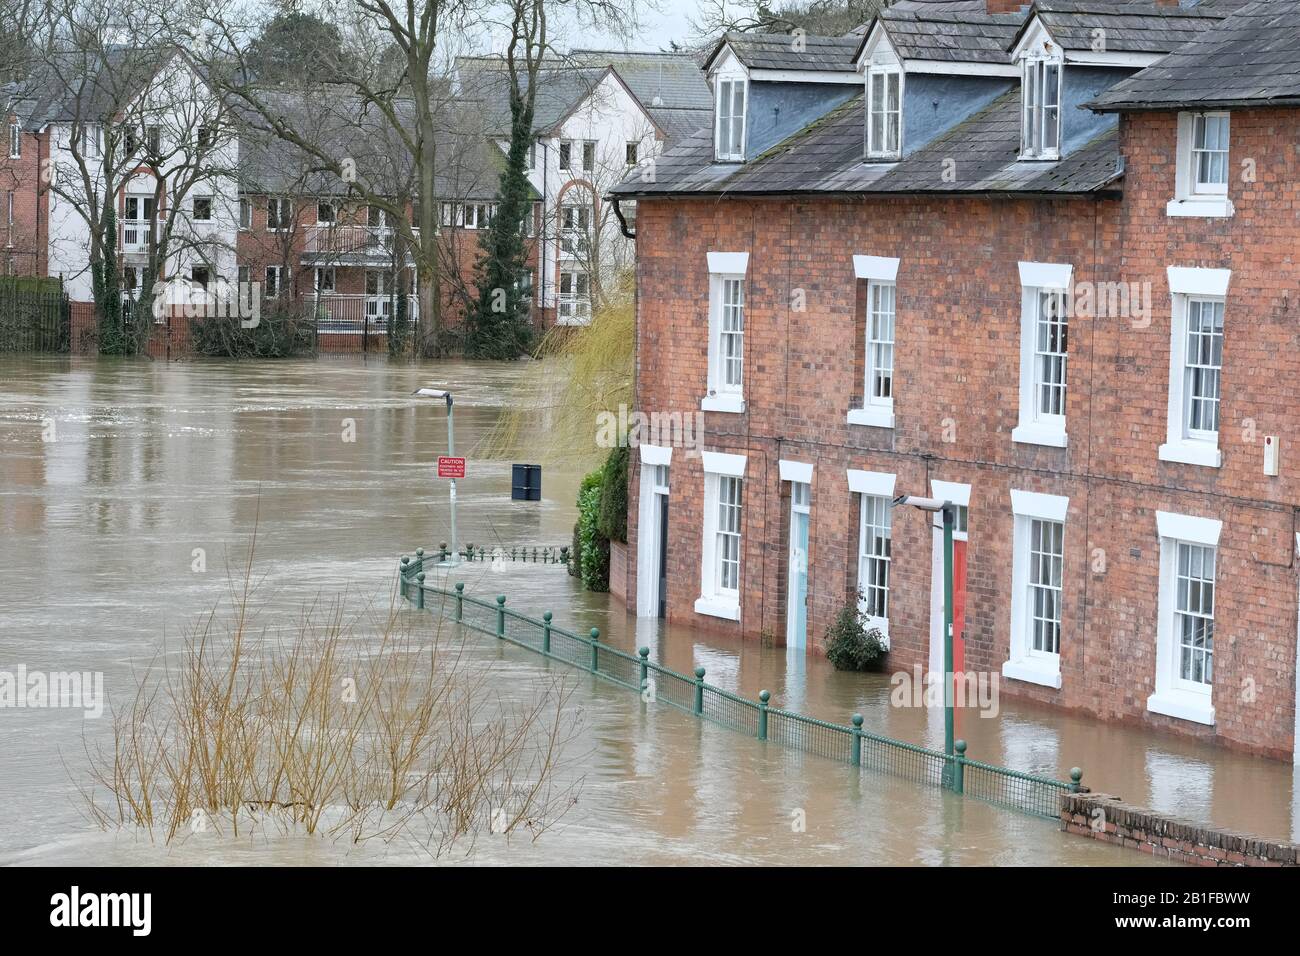 Shrewsbury, Shropshire, UK - Tuesday 25th February 2020 - Riverside properties have been flooded in Shrewsbury city centre as the River Severn reaches new flood heights and with a Severe Flood Warning currently in force for Shrewsbury. Photo Steven May / Alamy Live News Stock Photo